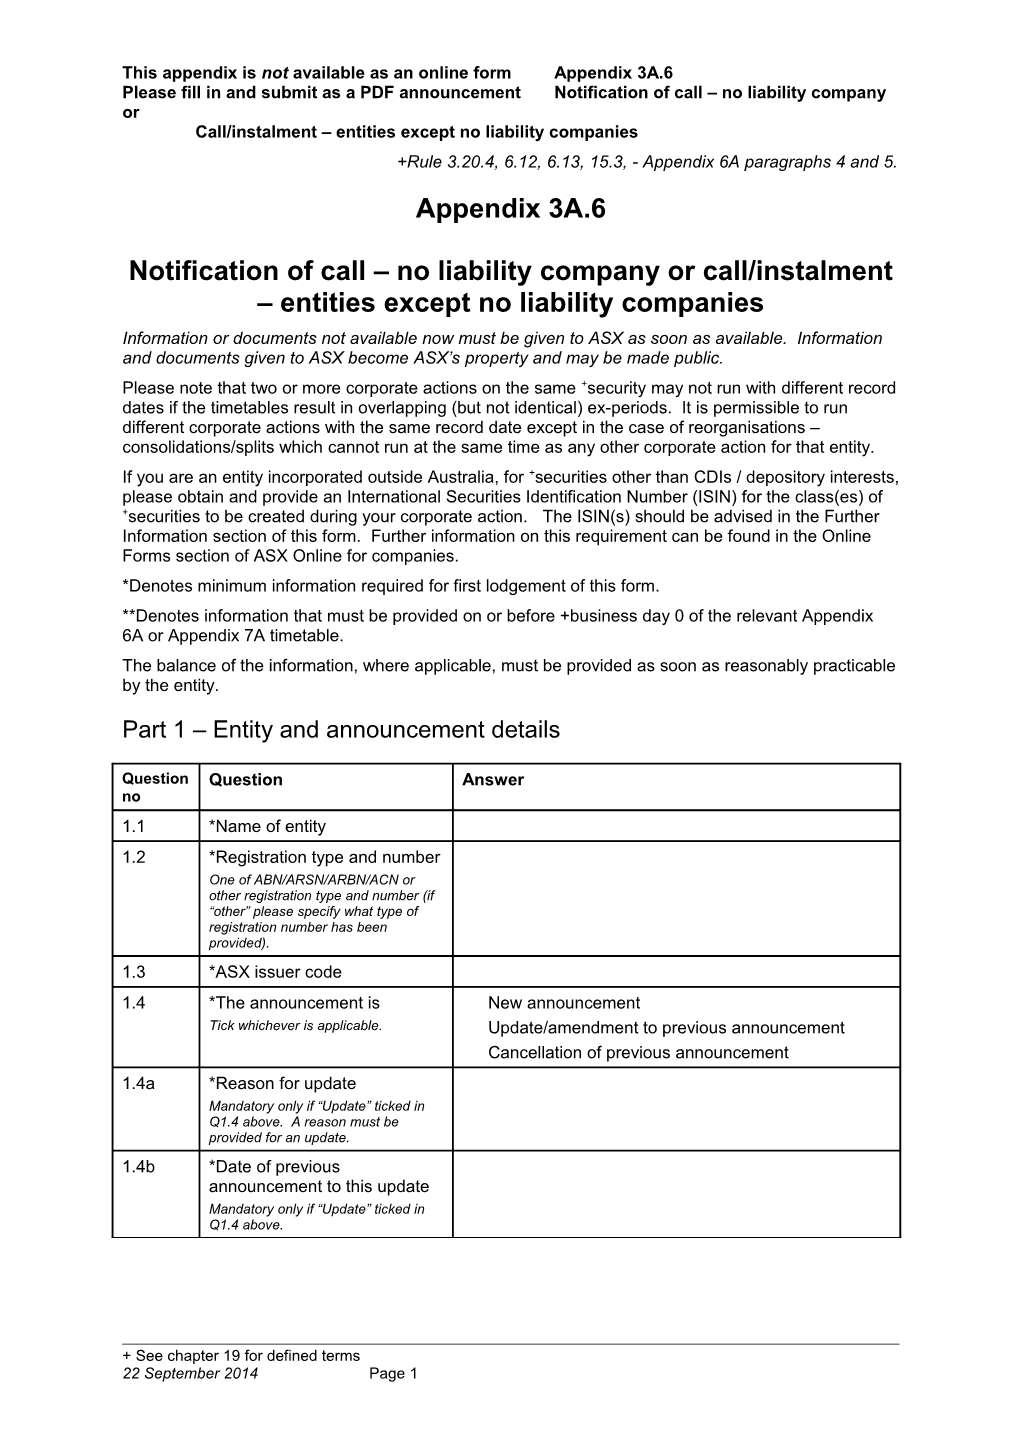 ASX Listing Rules Appendix 3A.6 - Notification of Call